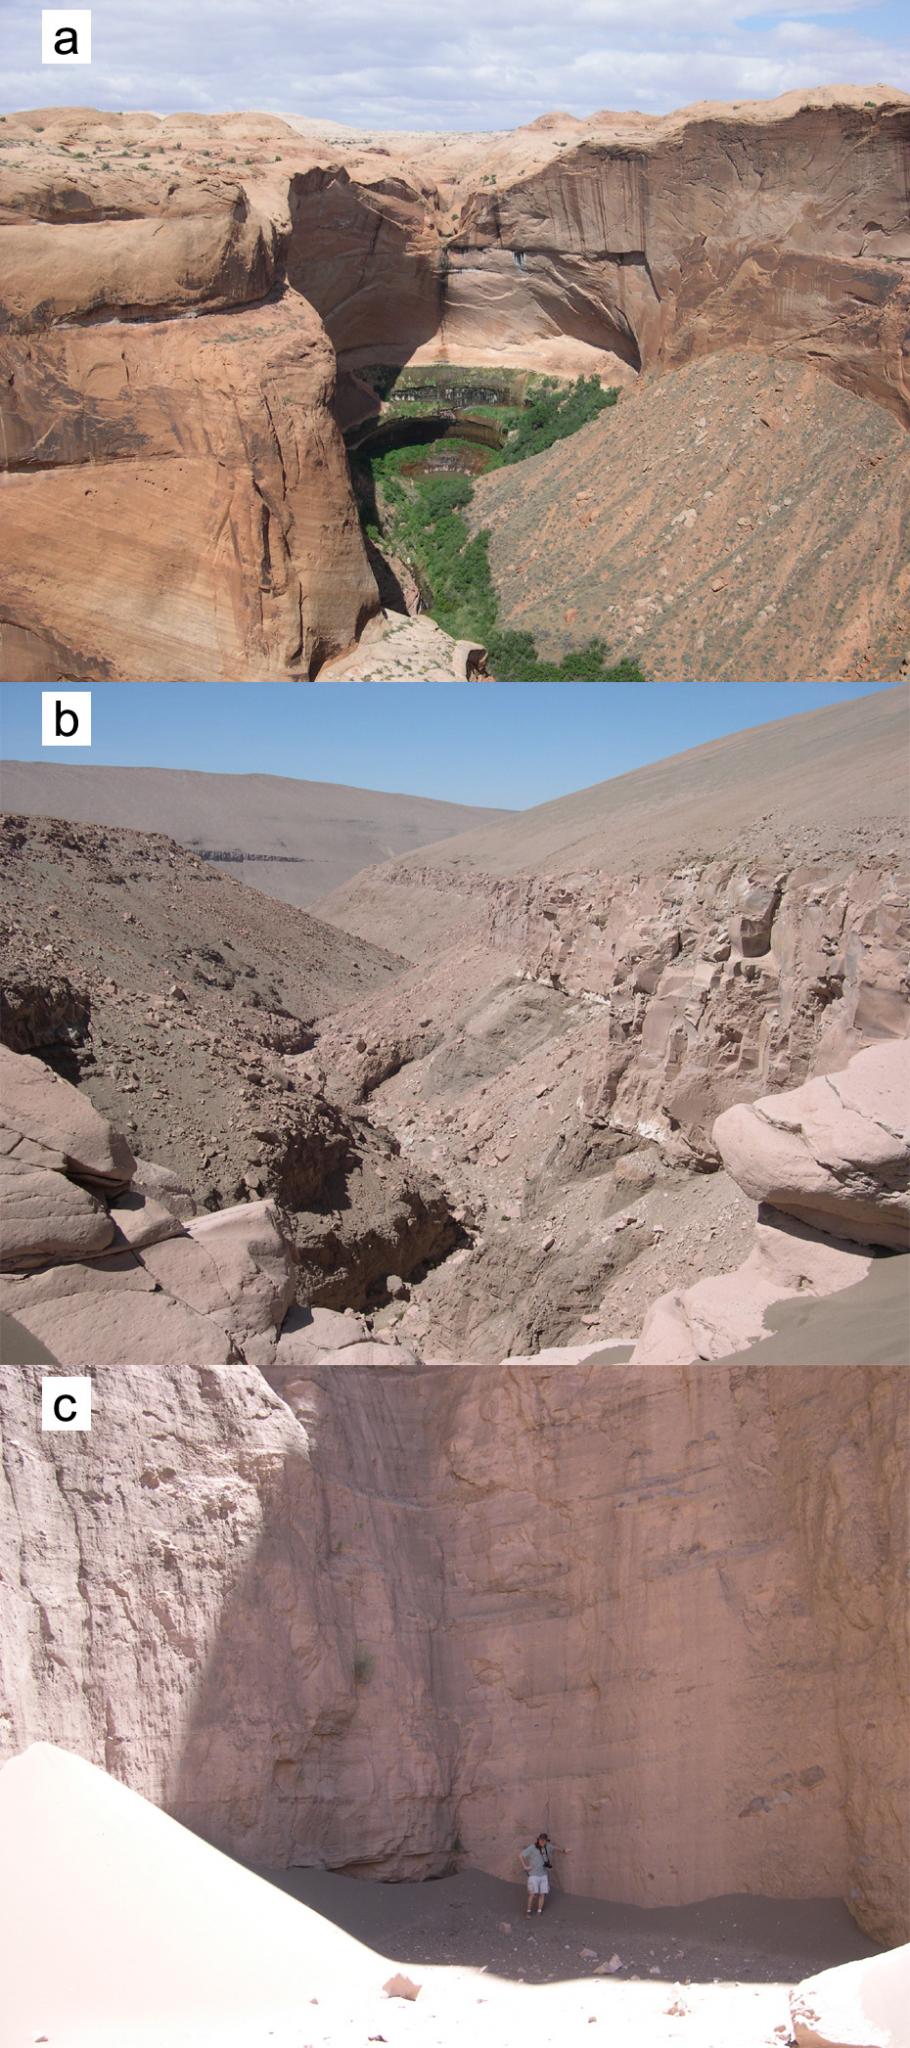 Comparison of Theater-Headed Valleys